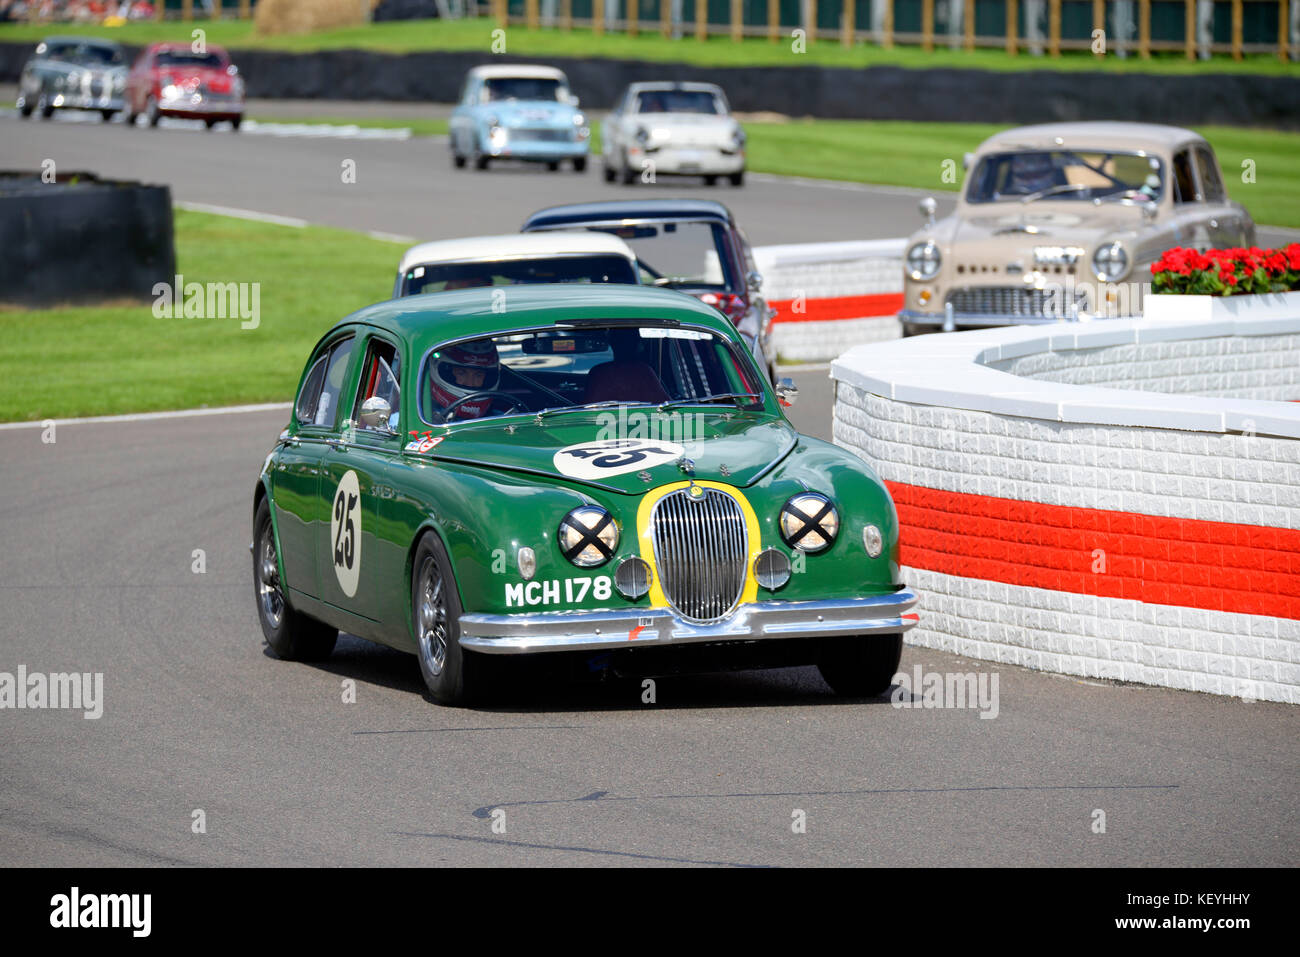 1958 Jaguar MkI owned by Trade Air Ltd driven by Frank Stippler racing in the St Mary's Trophy at Goodwood Revival 2017 Stock Photo